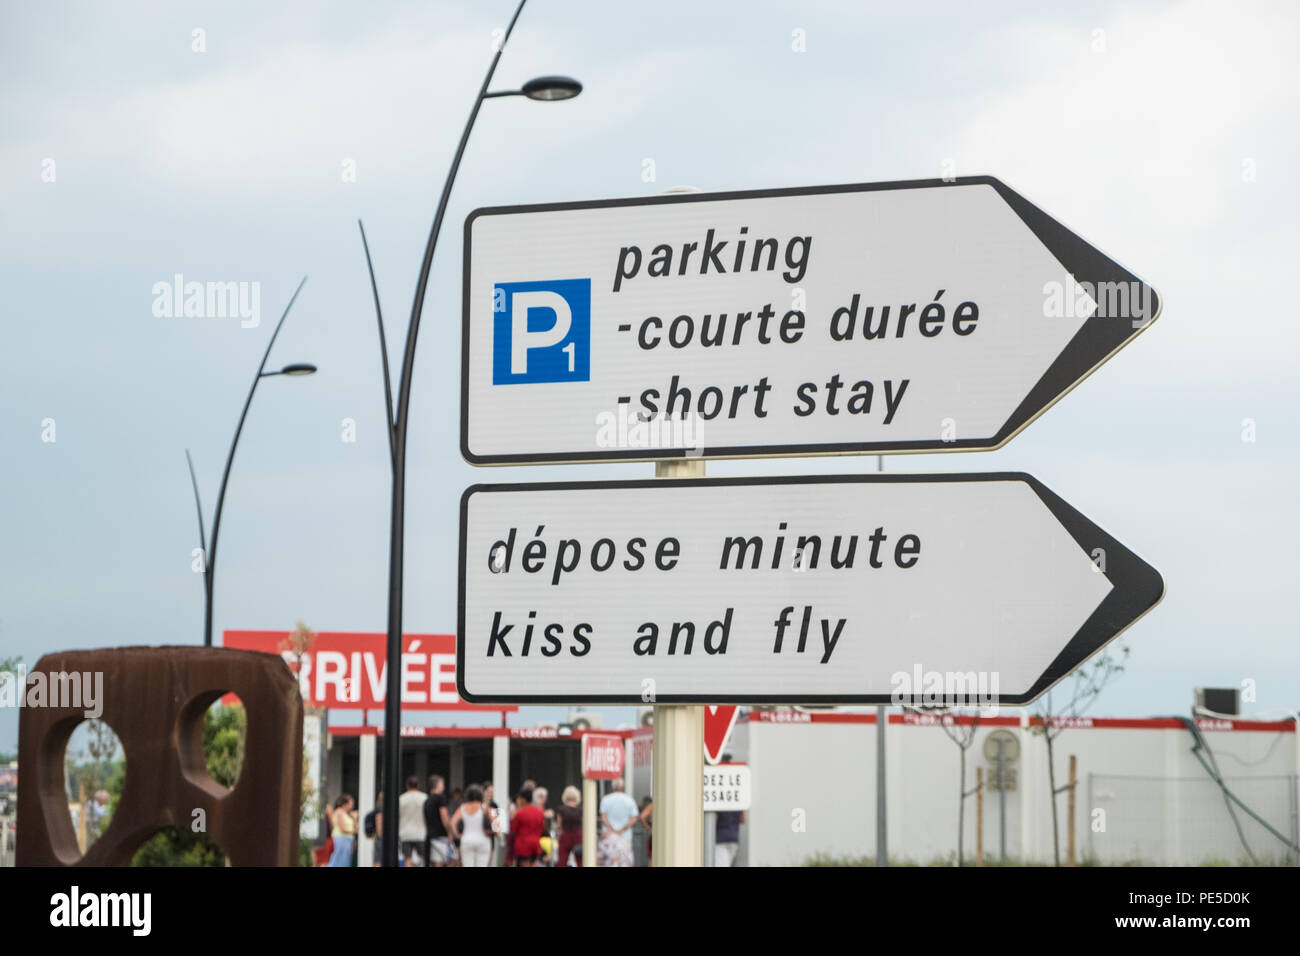 Free,parking,for,15,minutes,kiss and fly,quick,passenger,pick up,at, Carcassonne,Airport,Aude,region,South,of,France,French,Europe,European, Stock Photo